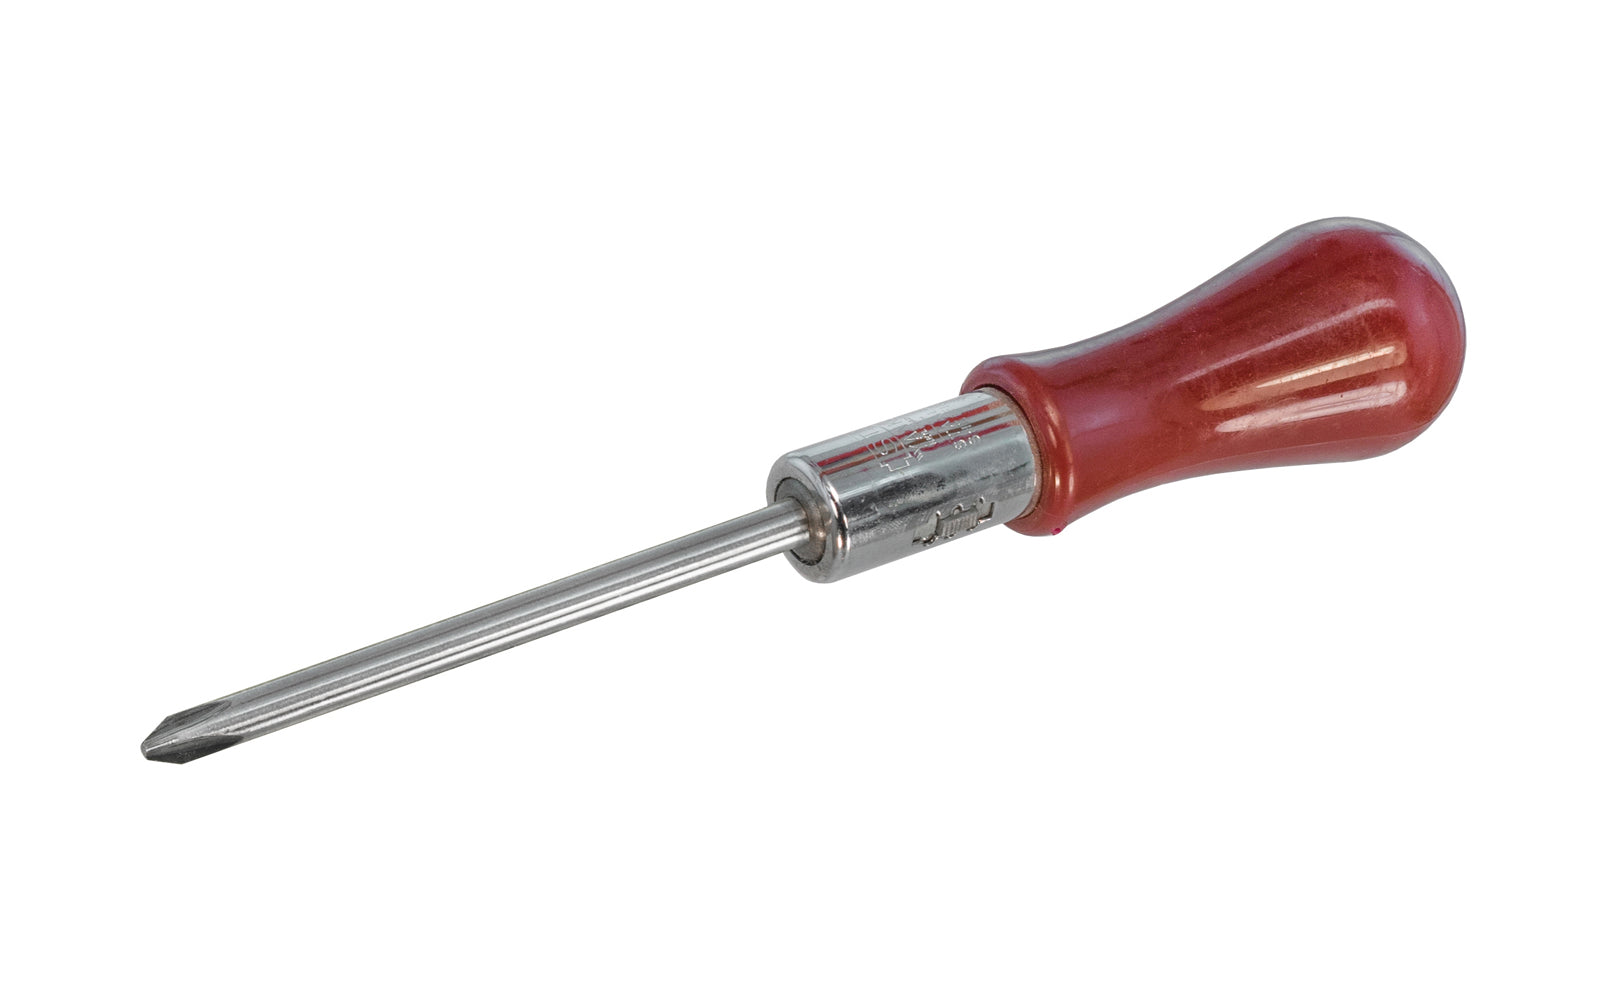 "Yankee 10A" screwdriver with No. 2 Phillips. Fully heat treated & tempered bar for long life. Model No. 0-06-112. Ratcheting Stanley screwdriver.   Made in England. 3253560681128